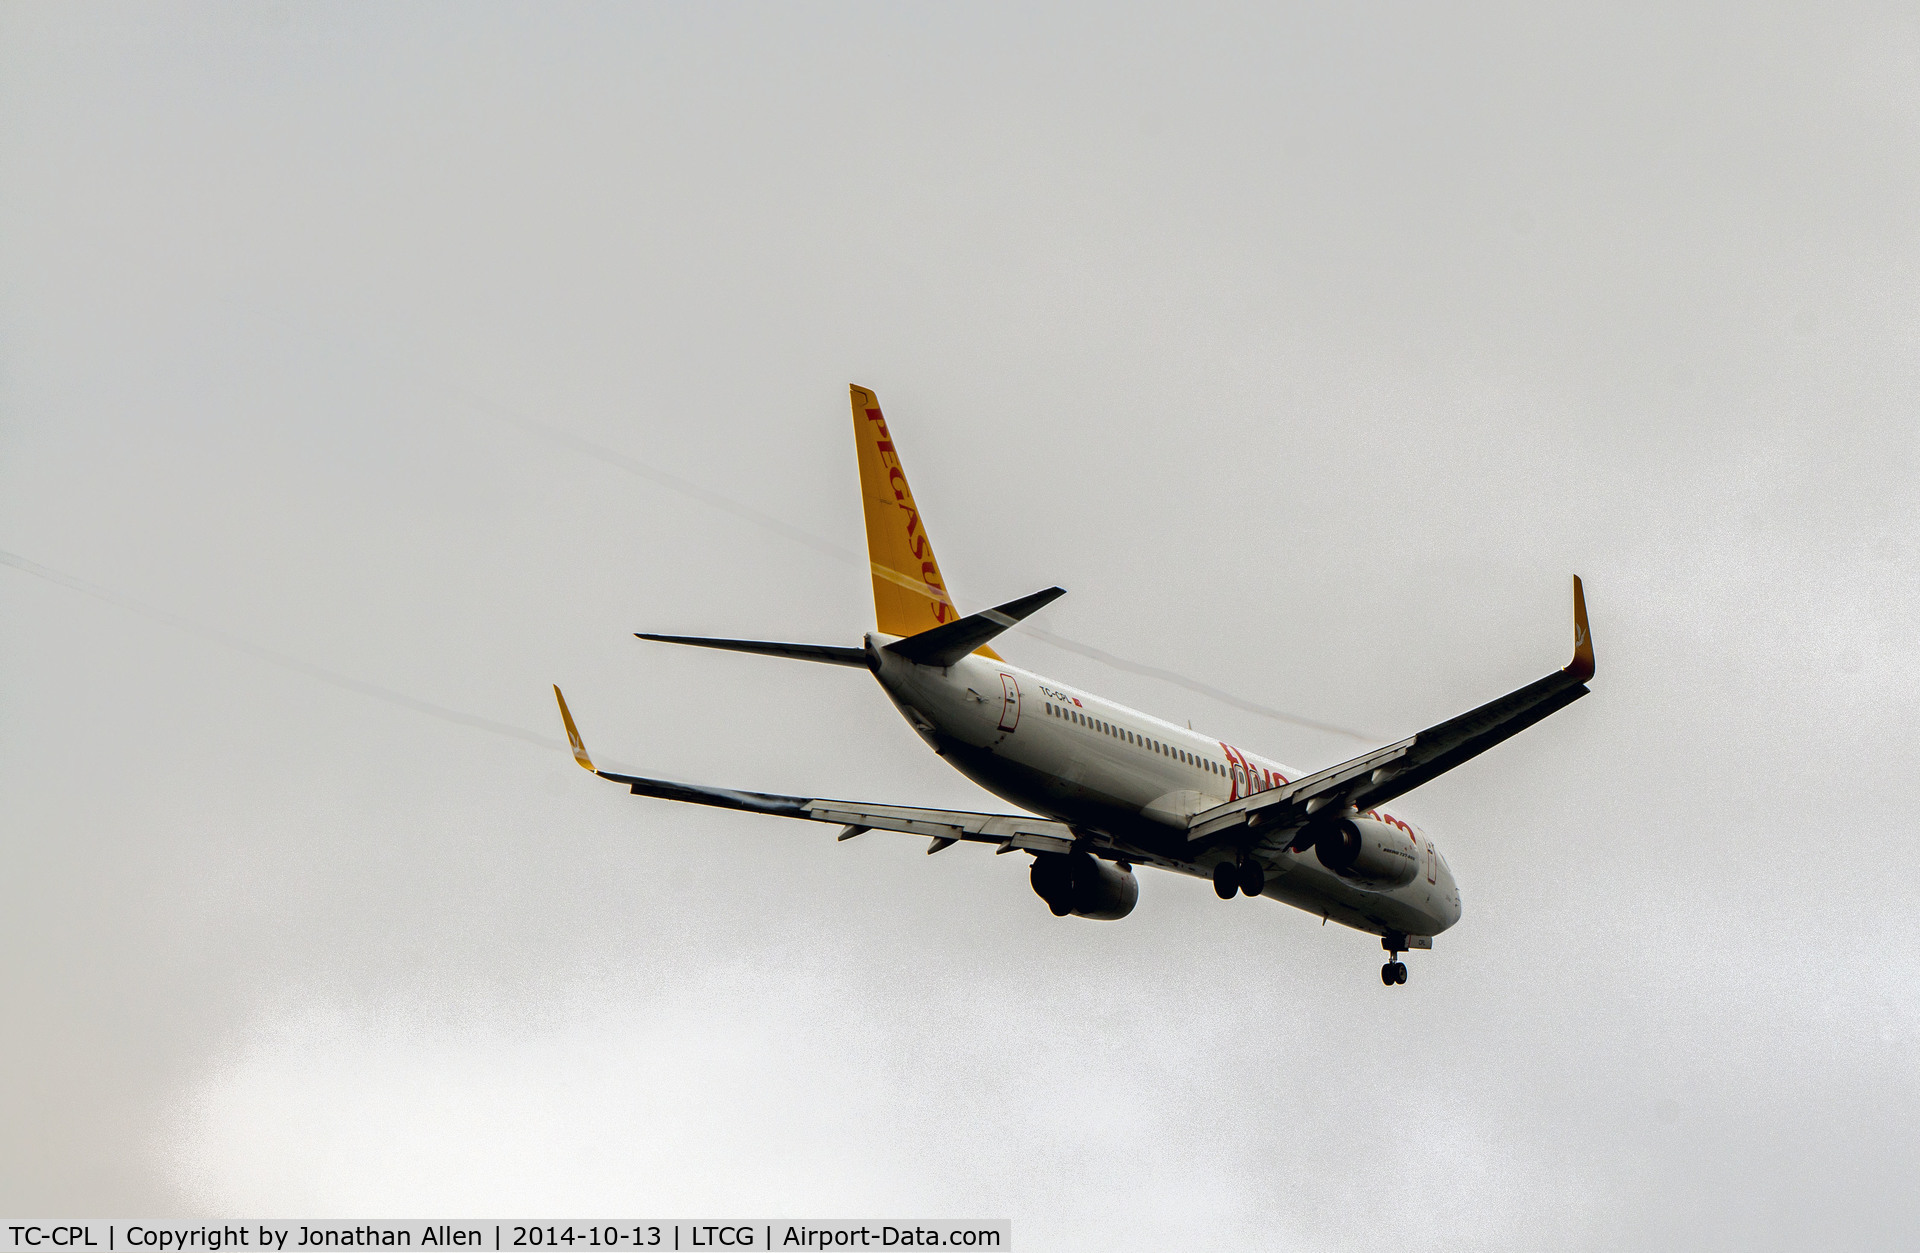 TC-CPL, 2014 Boeing 737-82R C/N 40010, On approach to Trabzon airport, Turkey.